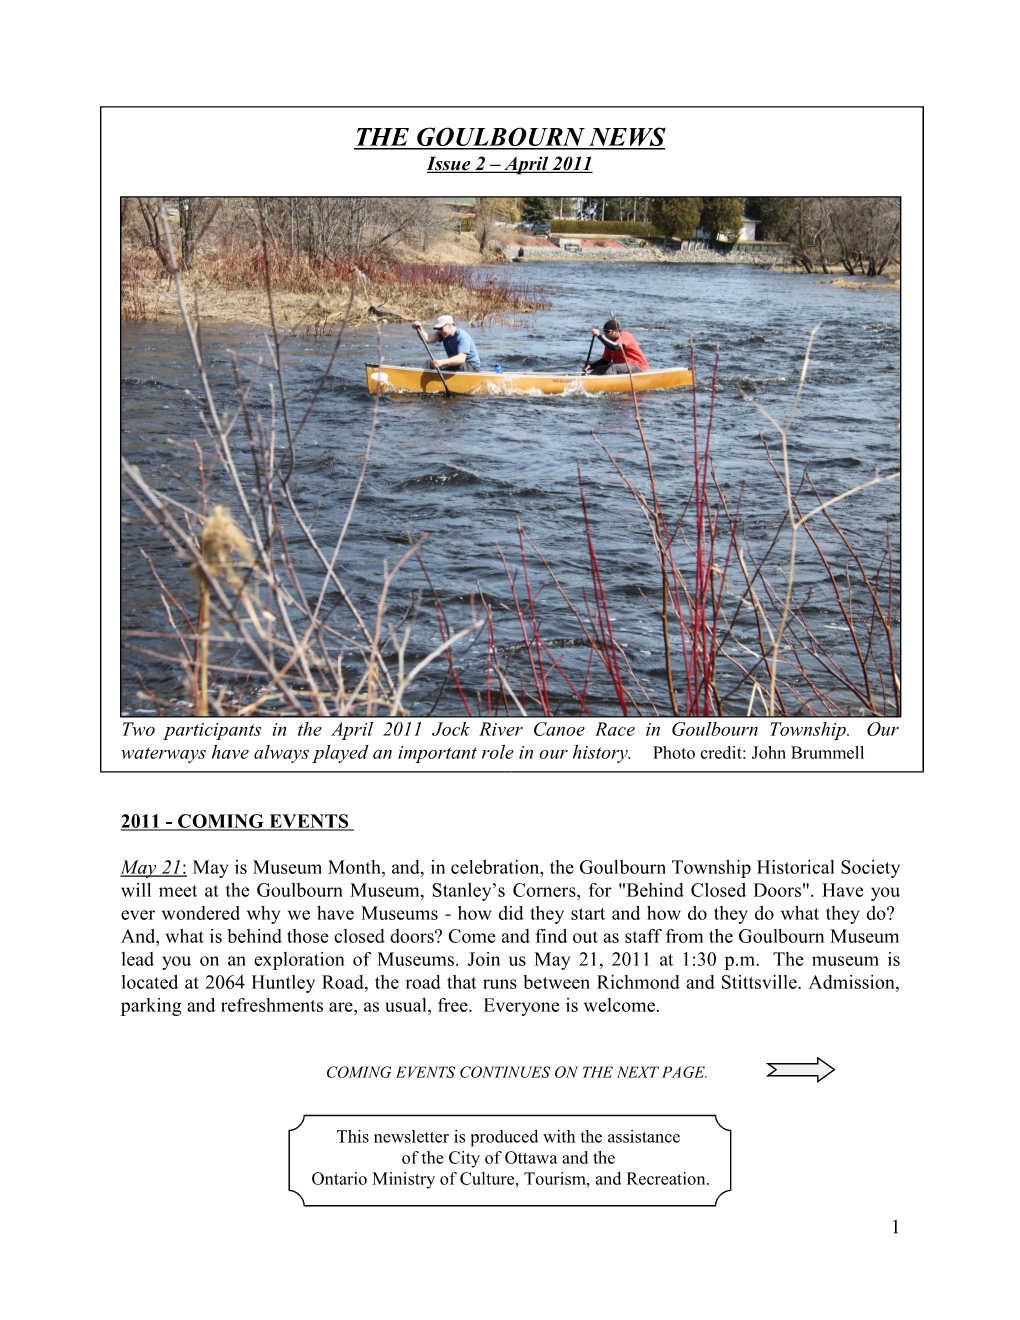 THE GOULBOURN NEWS Issue 2 – April 2011